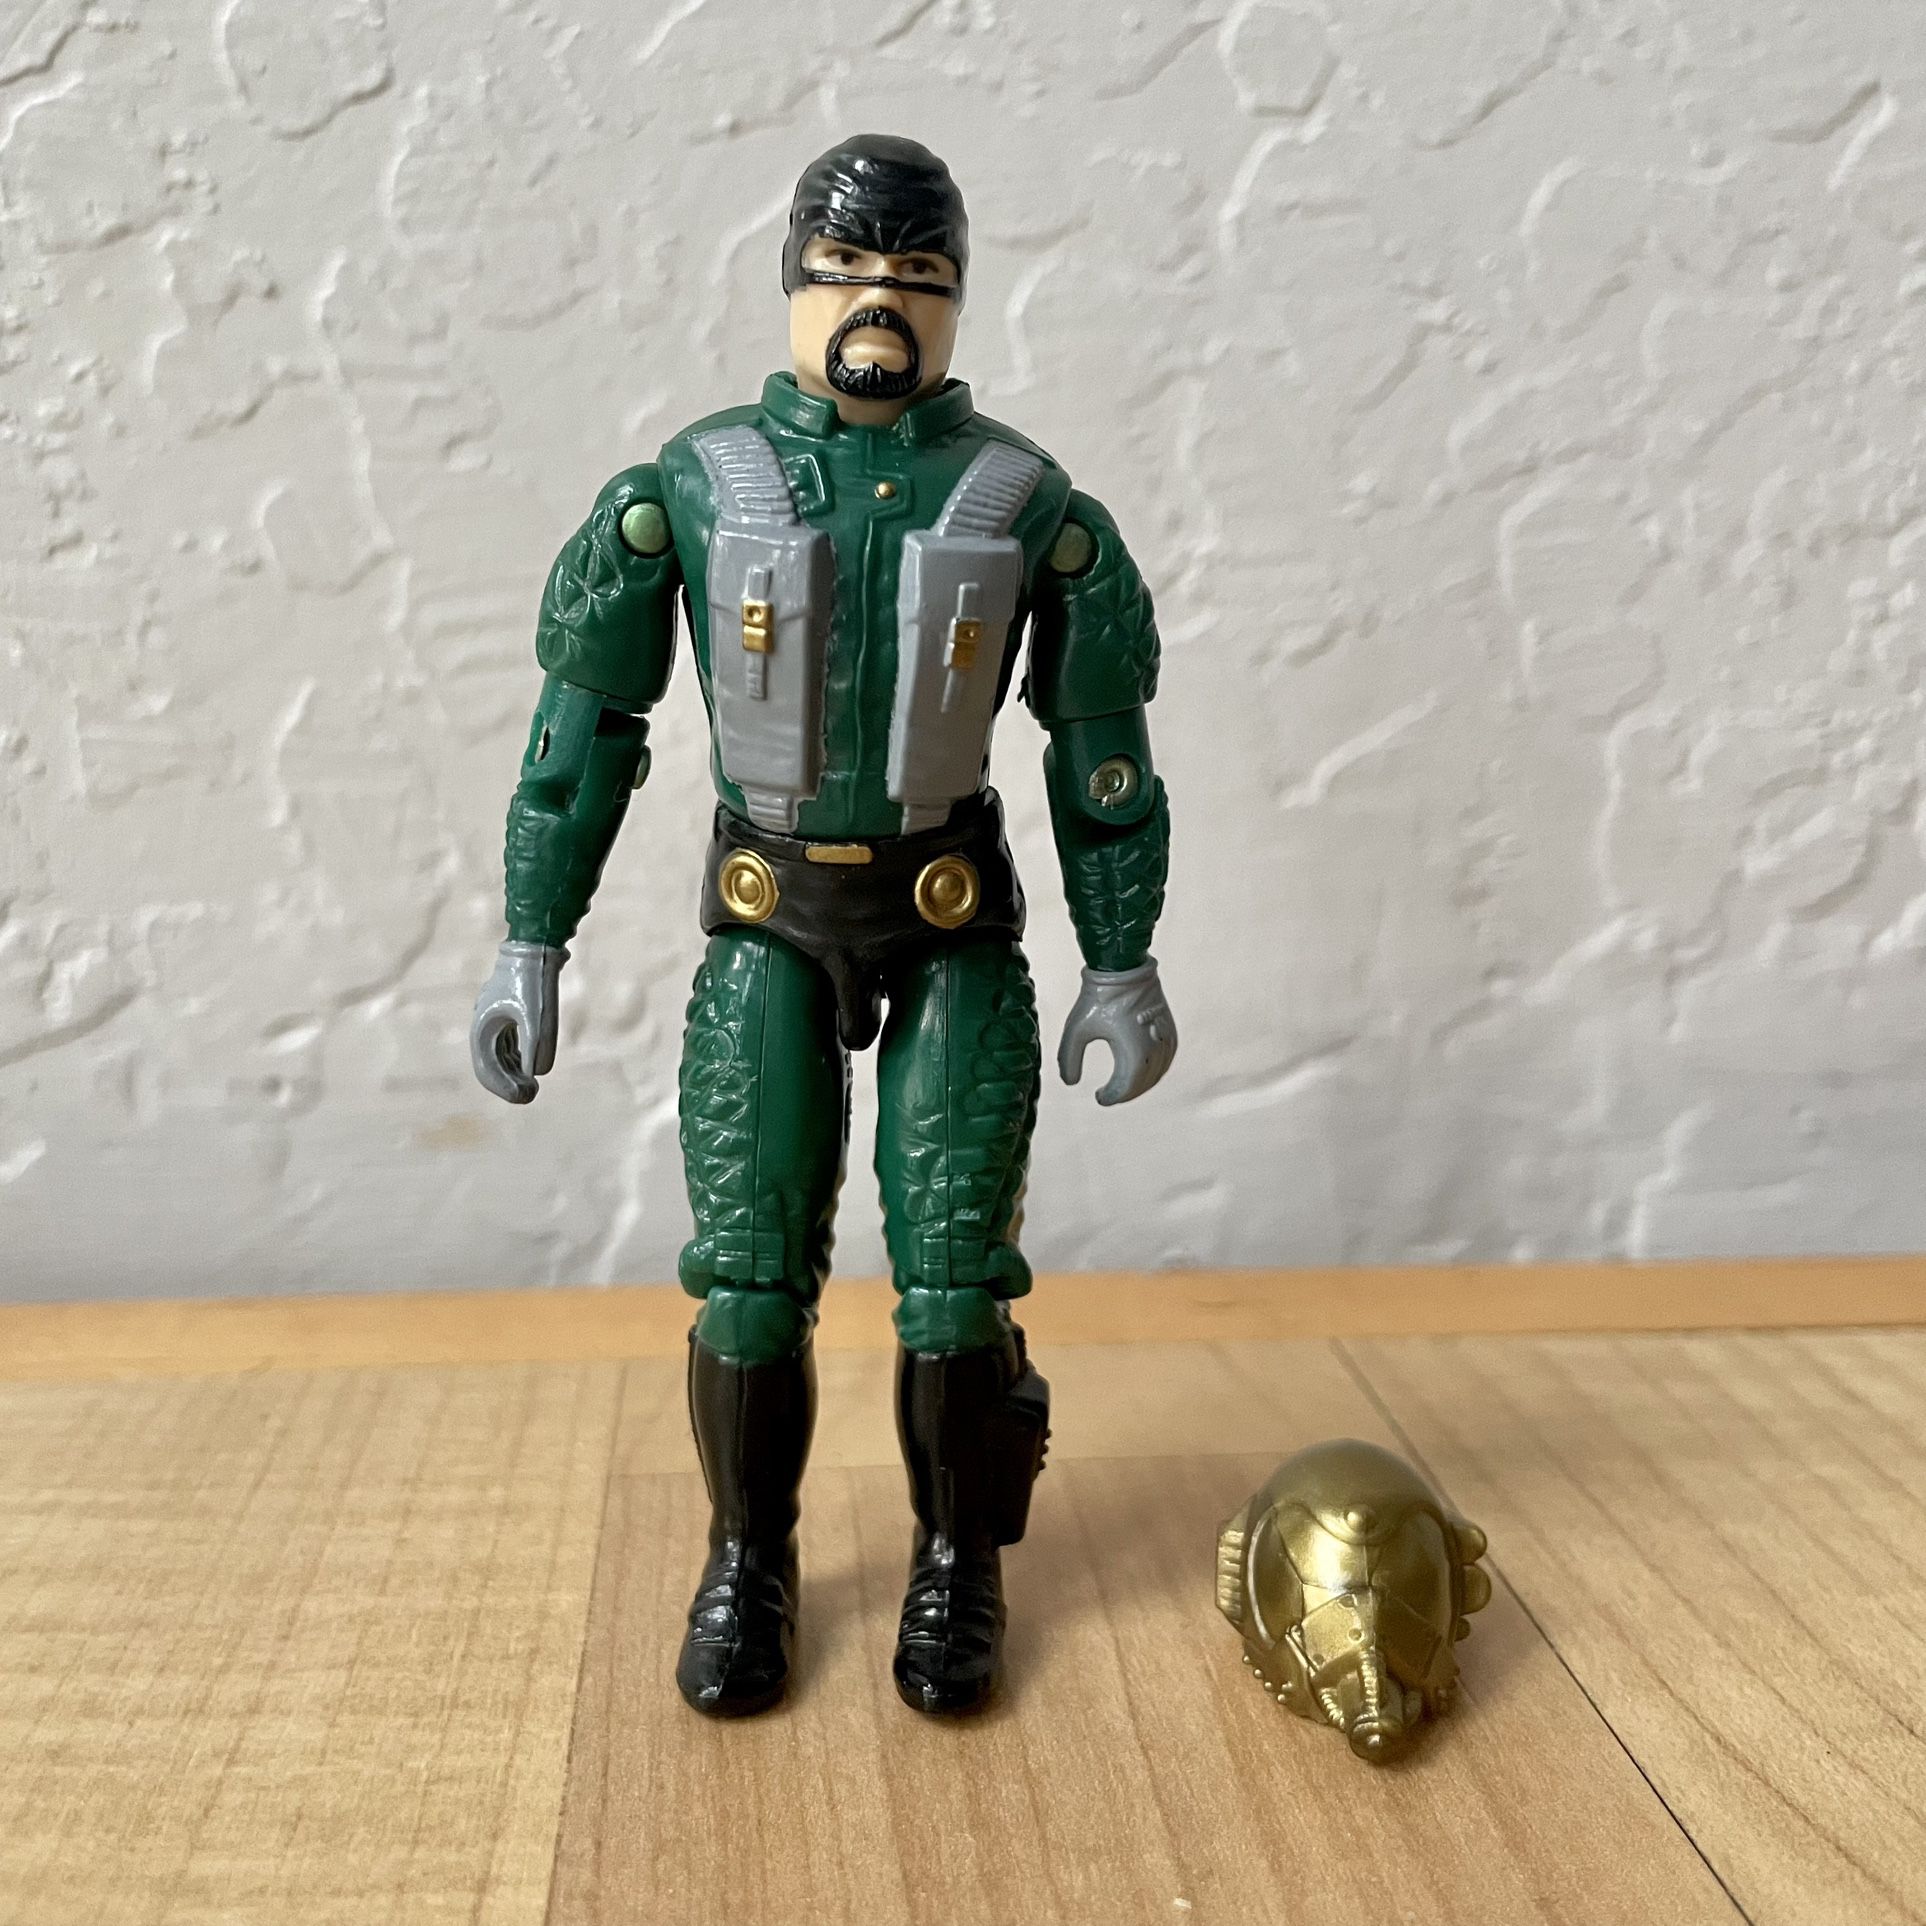 Vintage 1989 G.I. Joe Aero Viper Action Figure With Helmet Accessory Collectible Toy